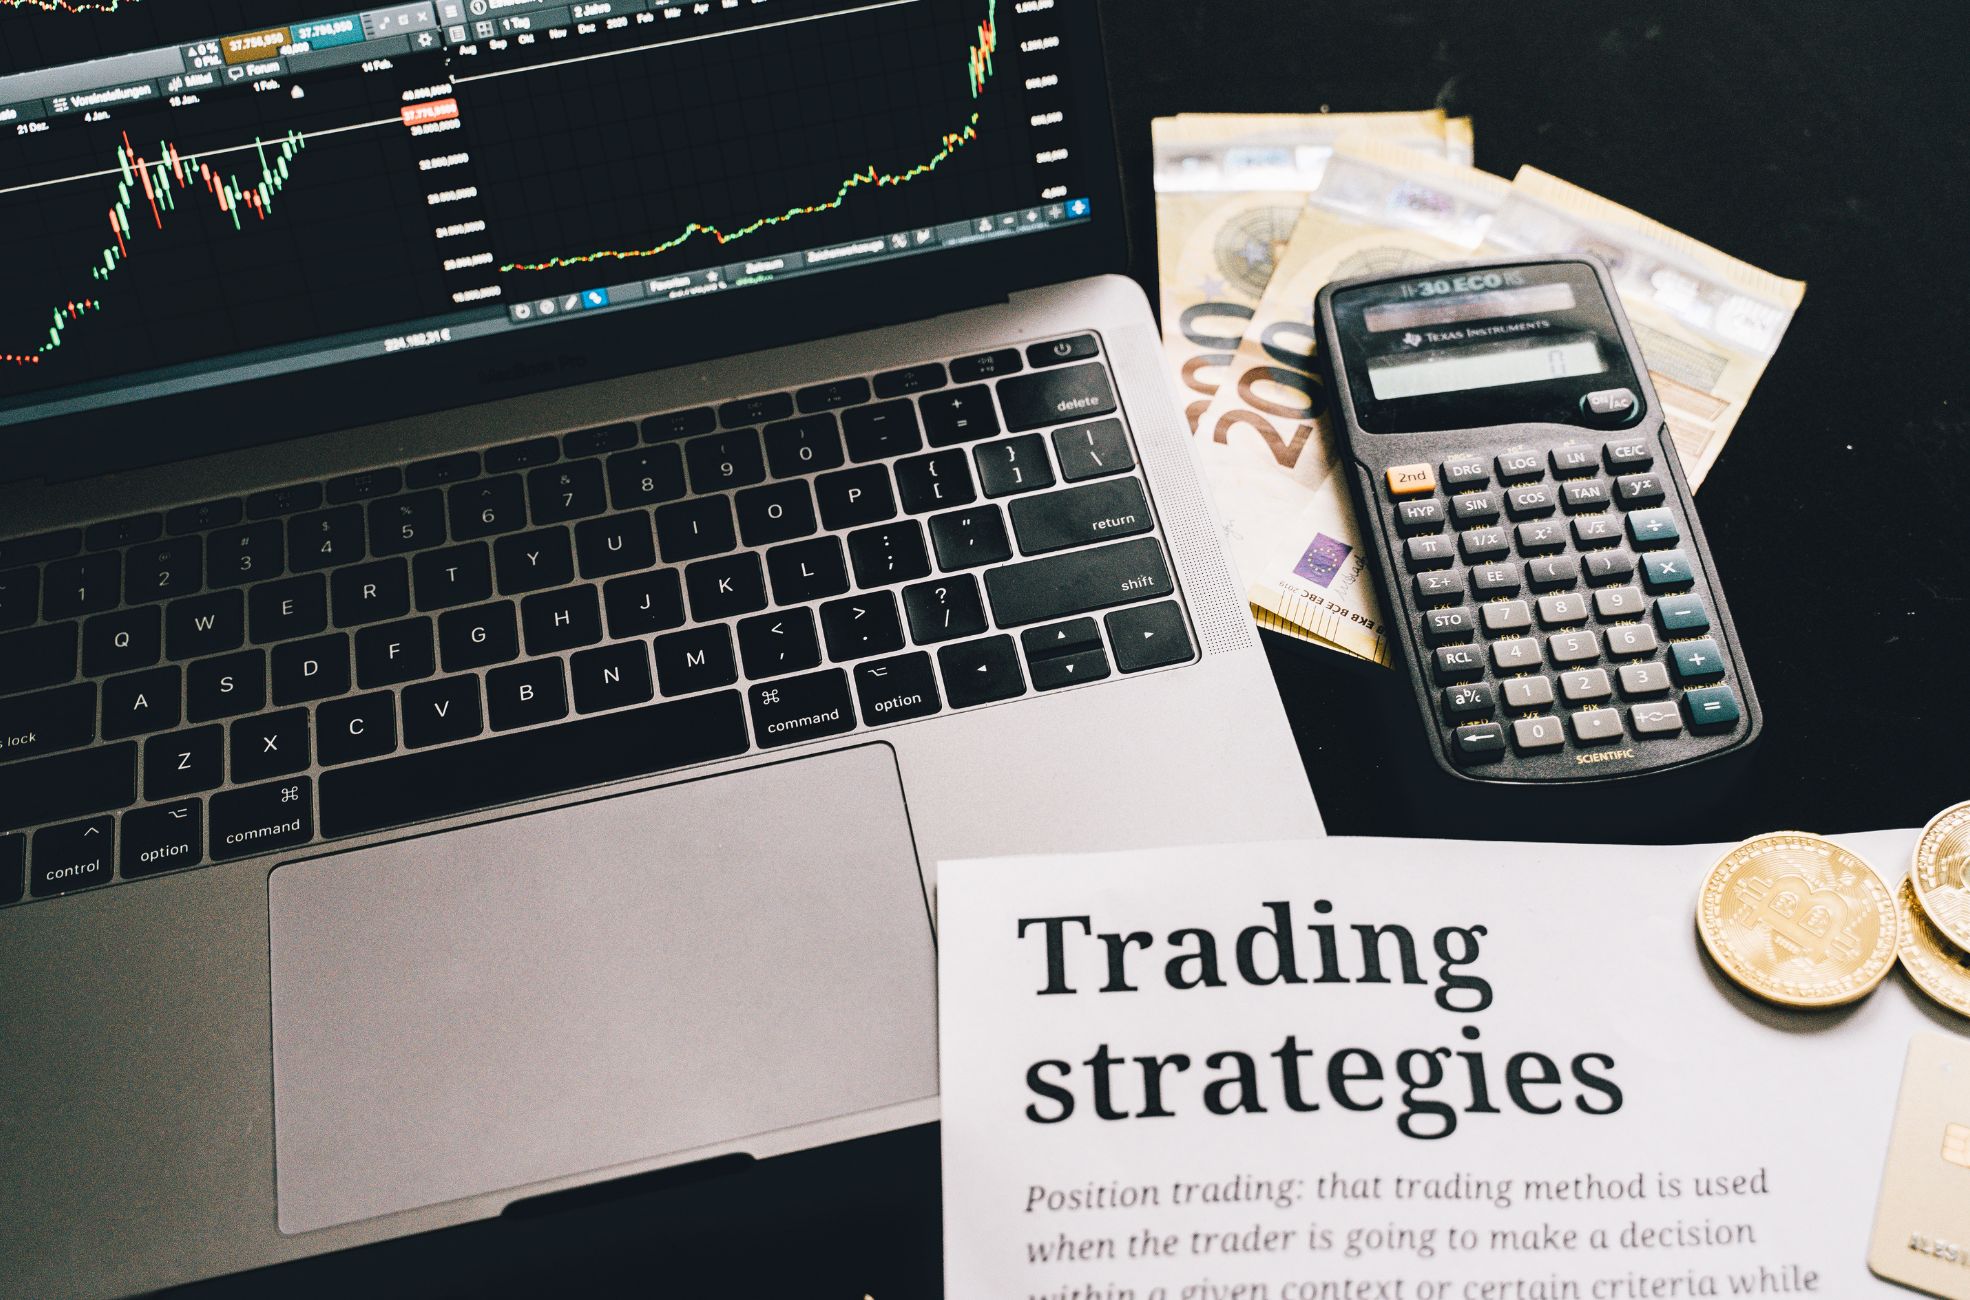 Trade Strategies List Next To MacBook And Calculator